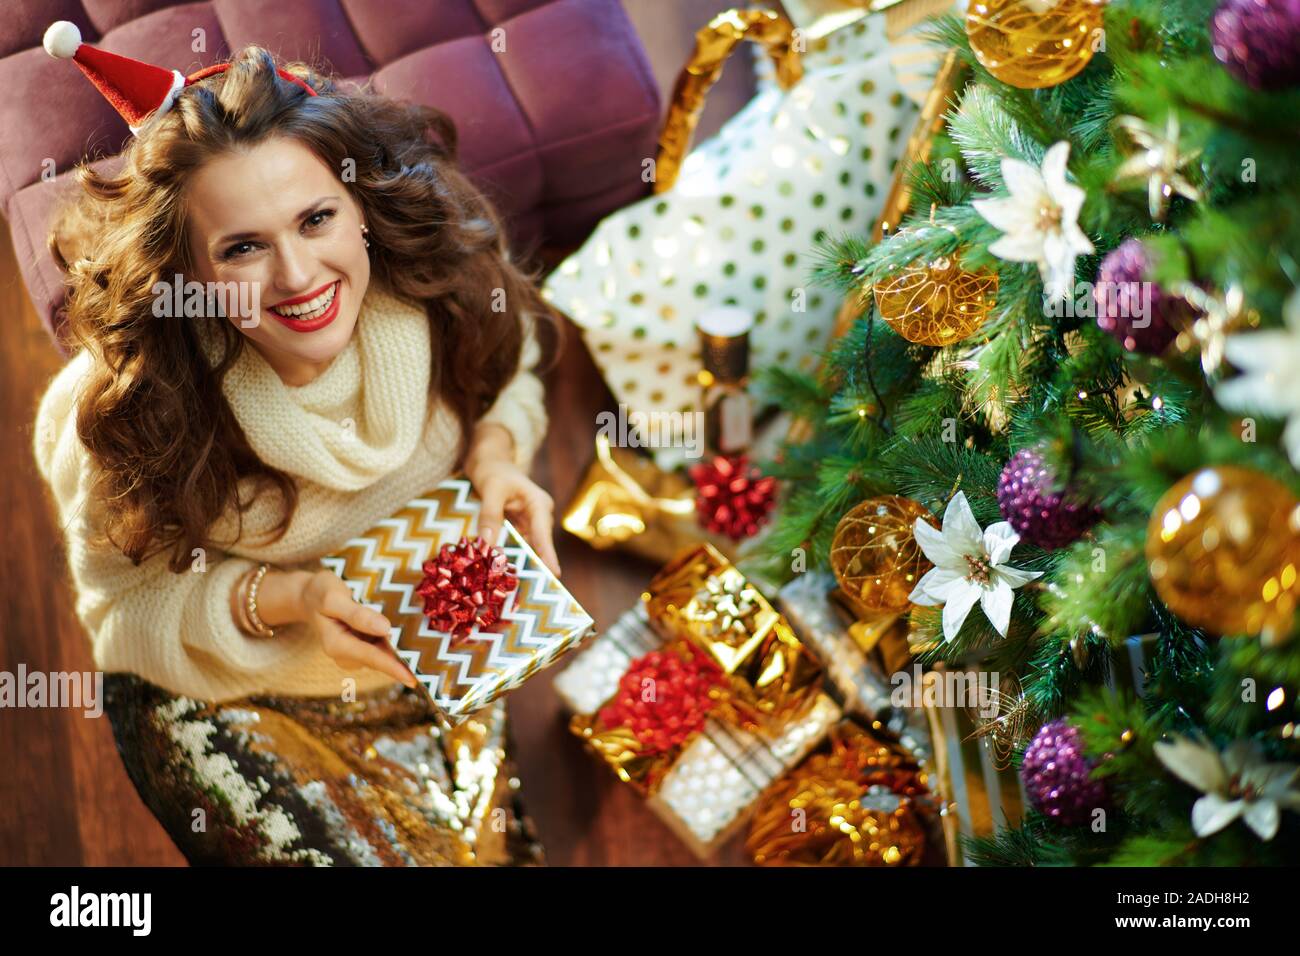 Upper view of smiling stylish woman with long brunette hair in gold sequin skirt and white sweater under decorated Christmas tree near present boxes h Stock Photo